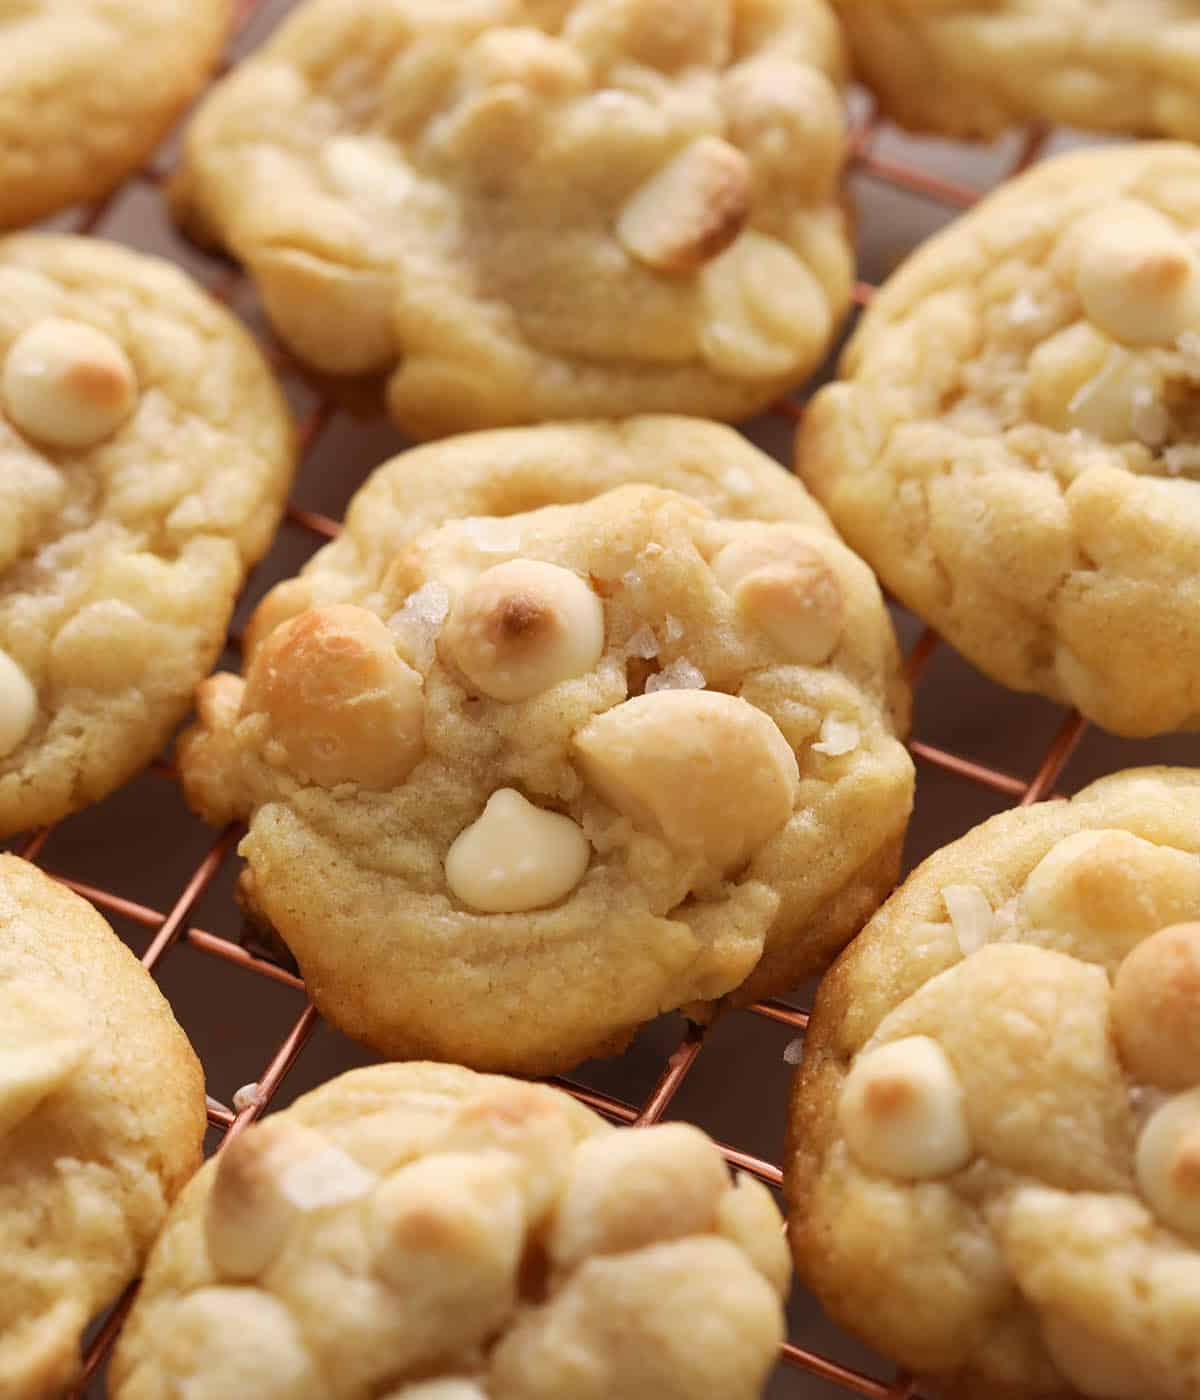 A group of White Chocolate Macadamia nut cookies on a cooling rack.